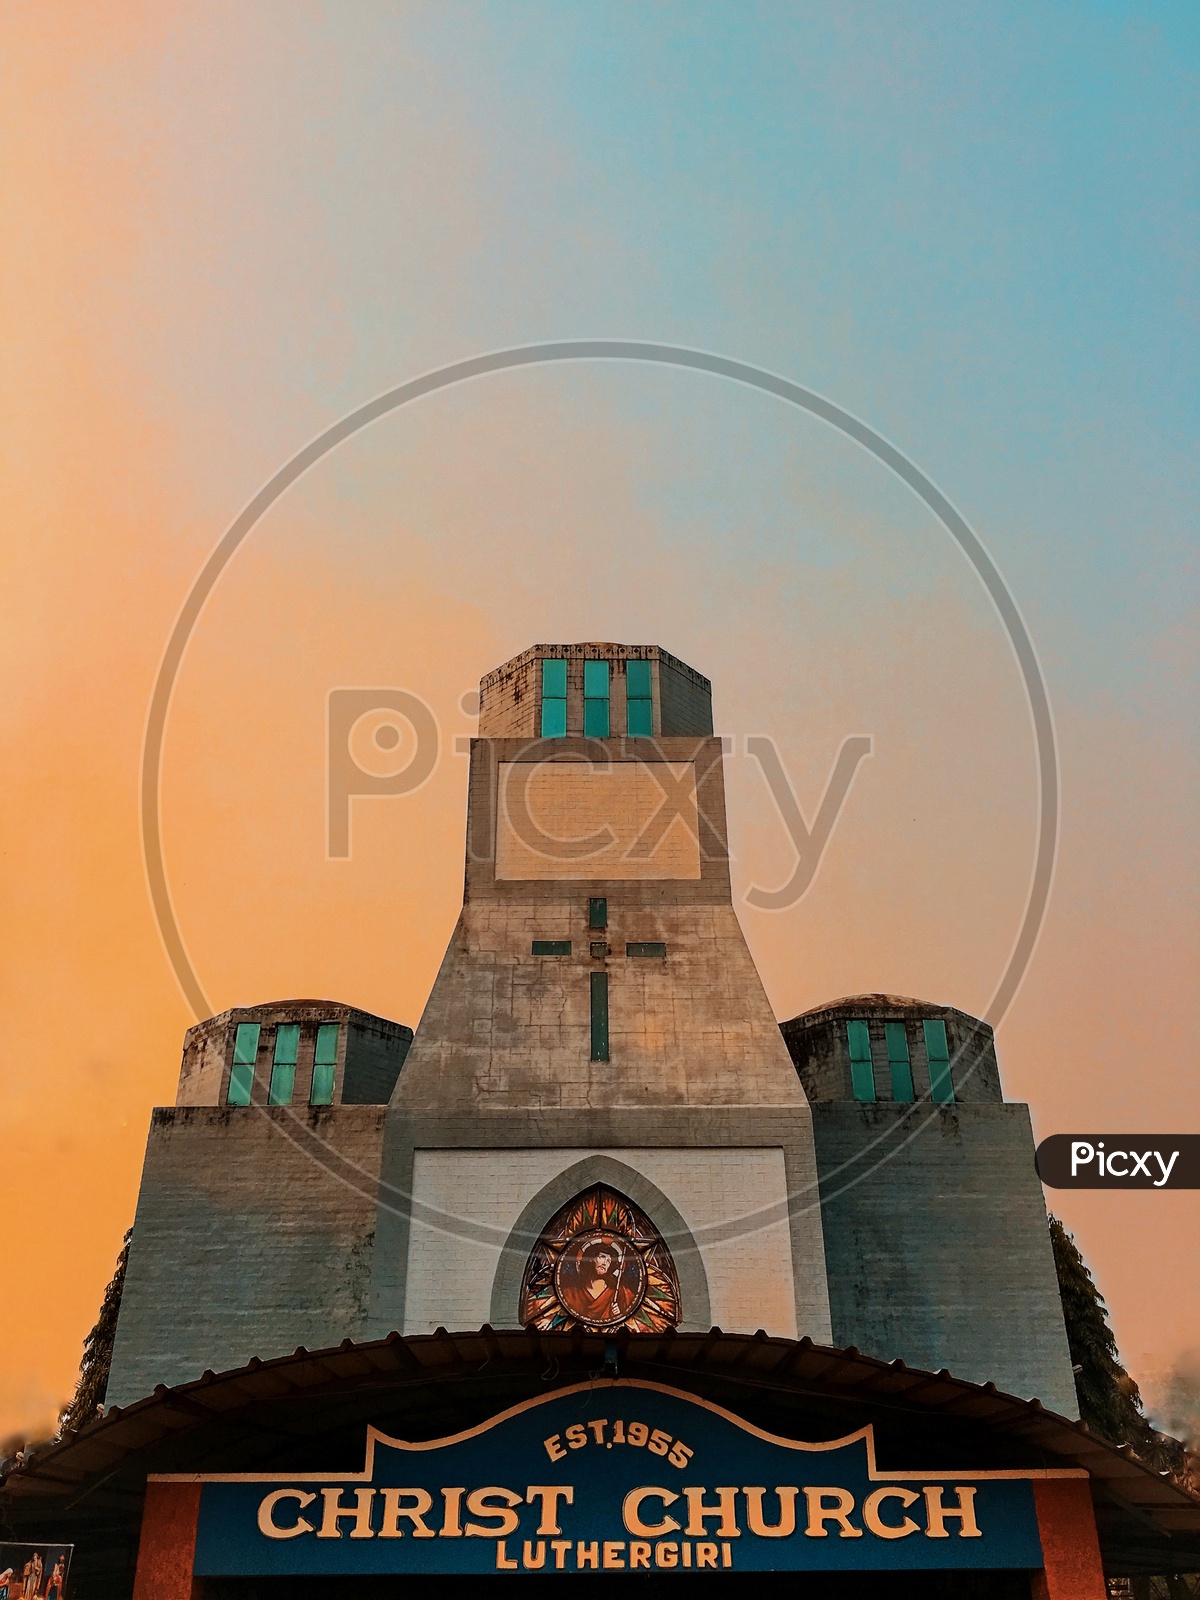 Architecture of Christ Church Luthergiri during a sunset